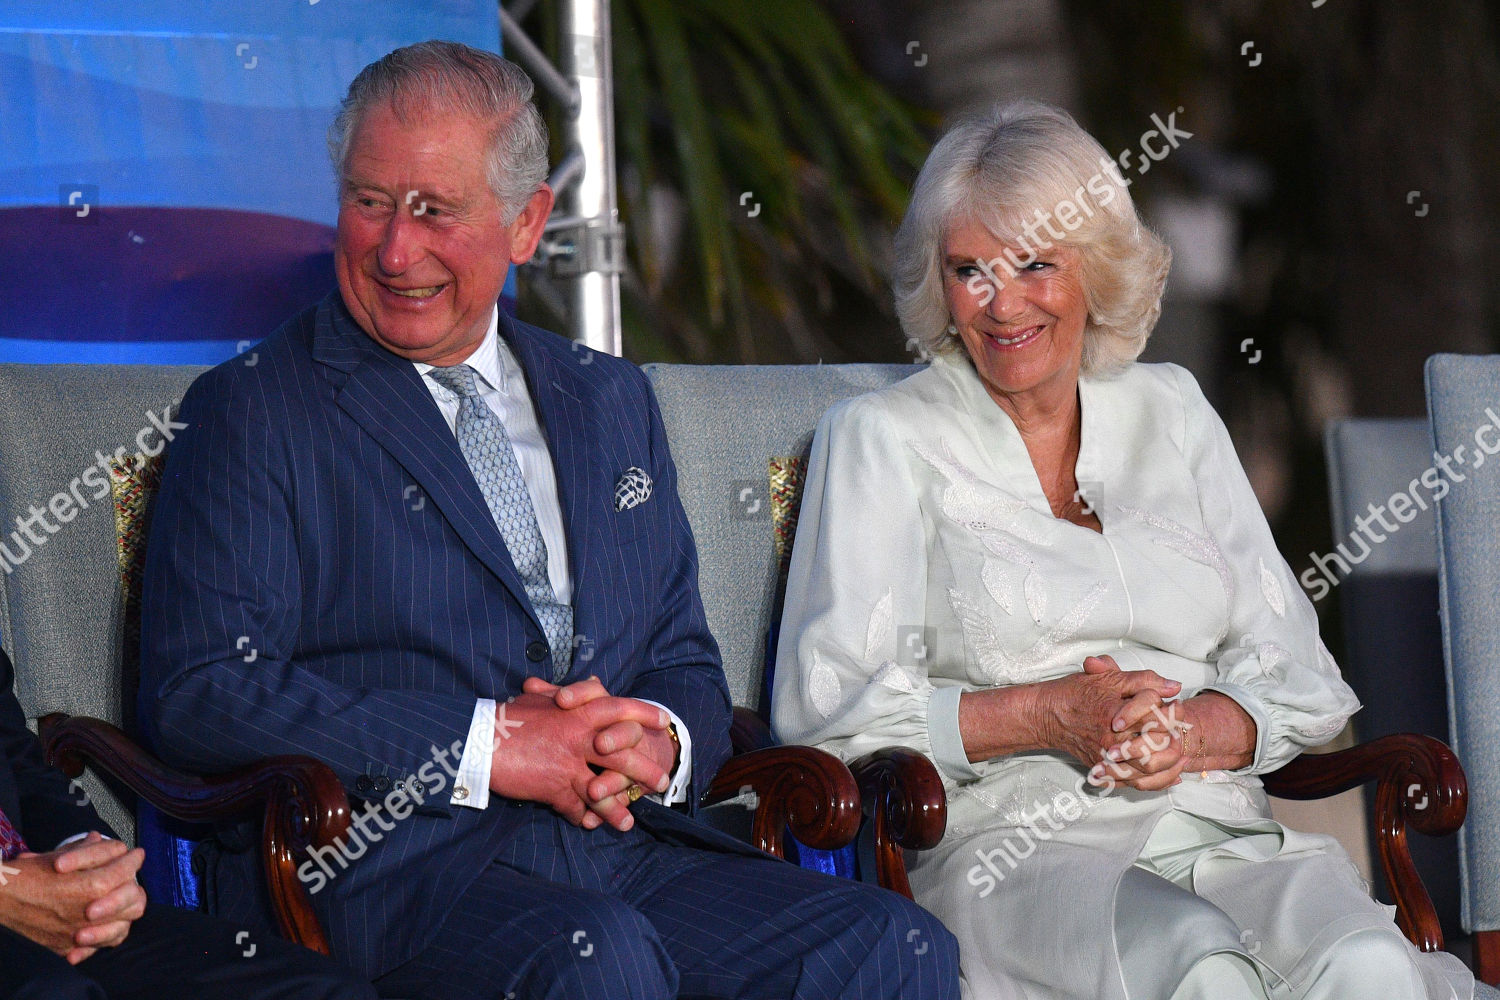 prince-charles-and-camilla-duchess-of-cornwall-caribbean-tour-cayman-islands-shutterstock-editorial-10180820dk.jpg